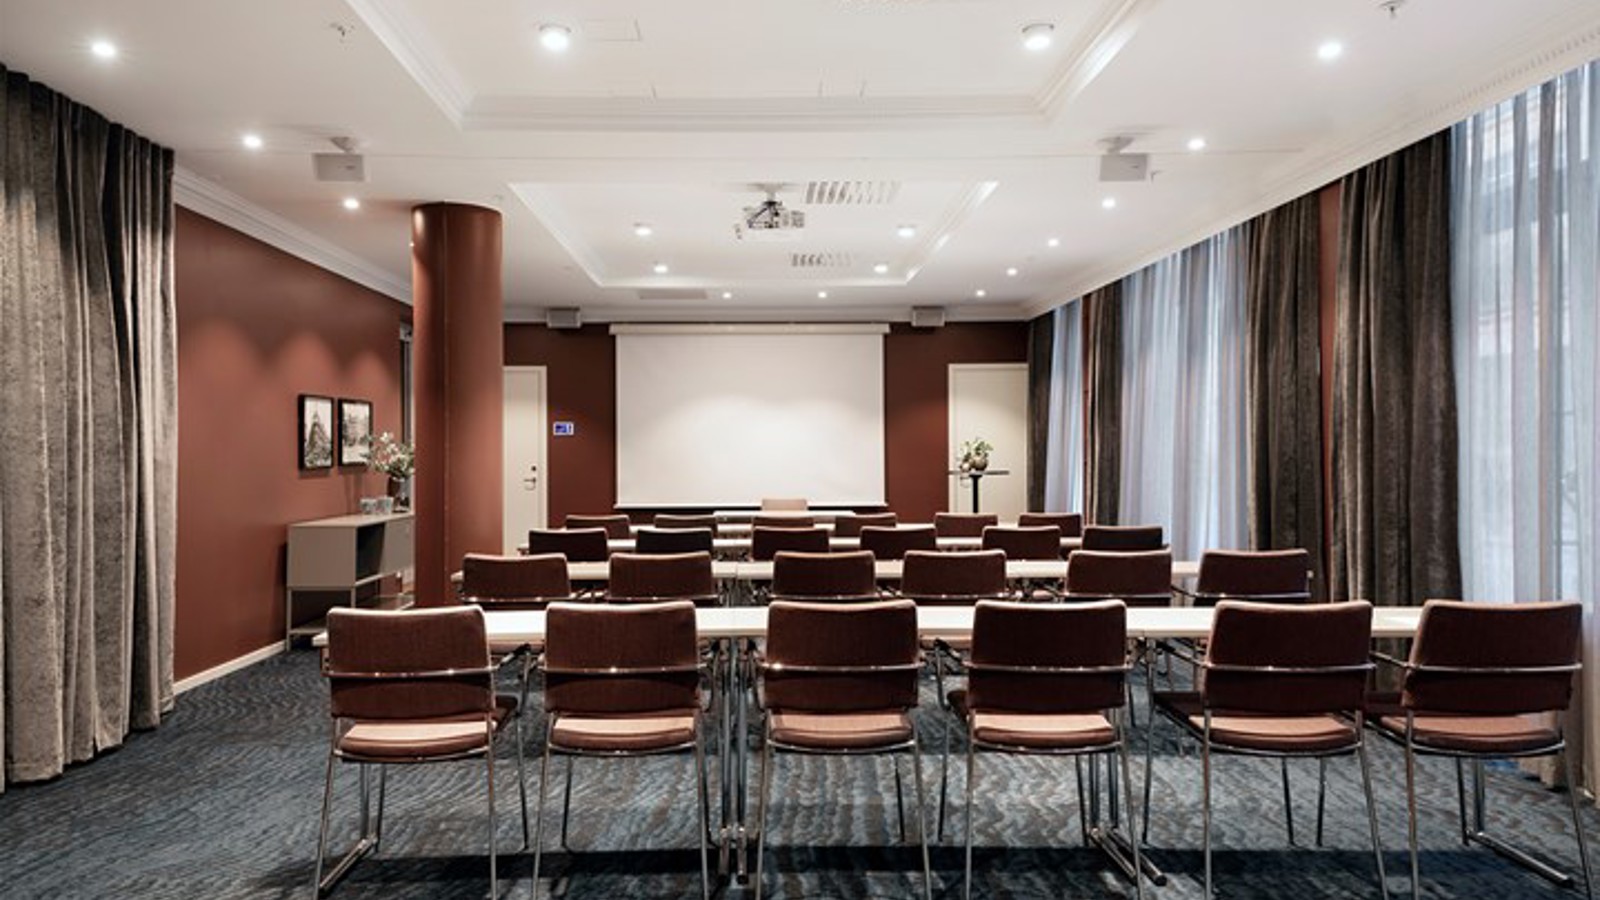 Conference room with lined up chairs, gray floor and brown walls